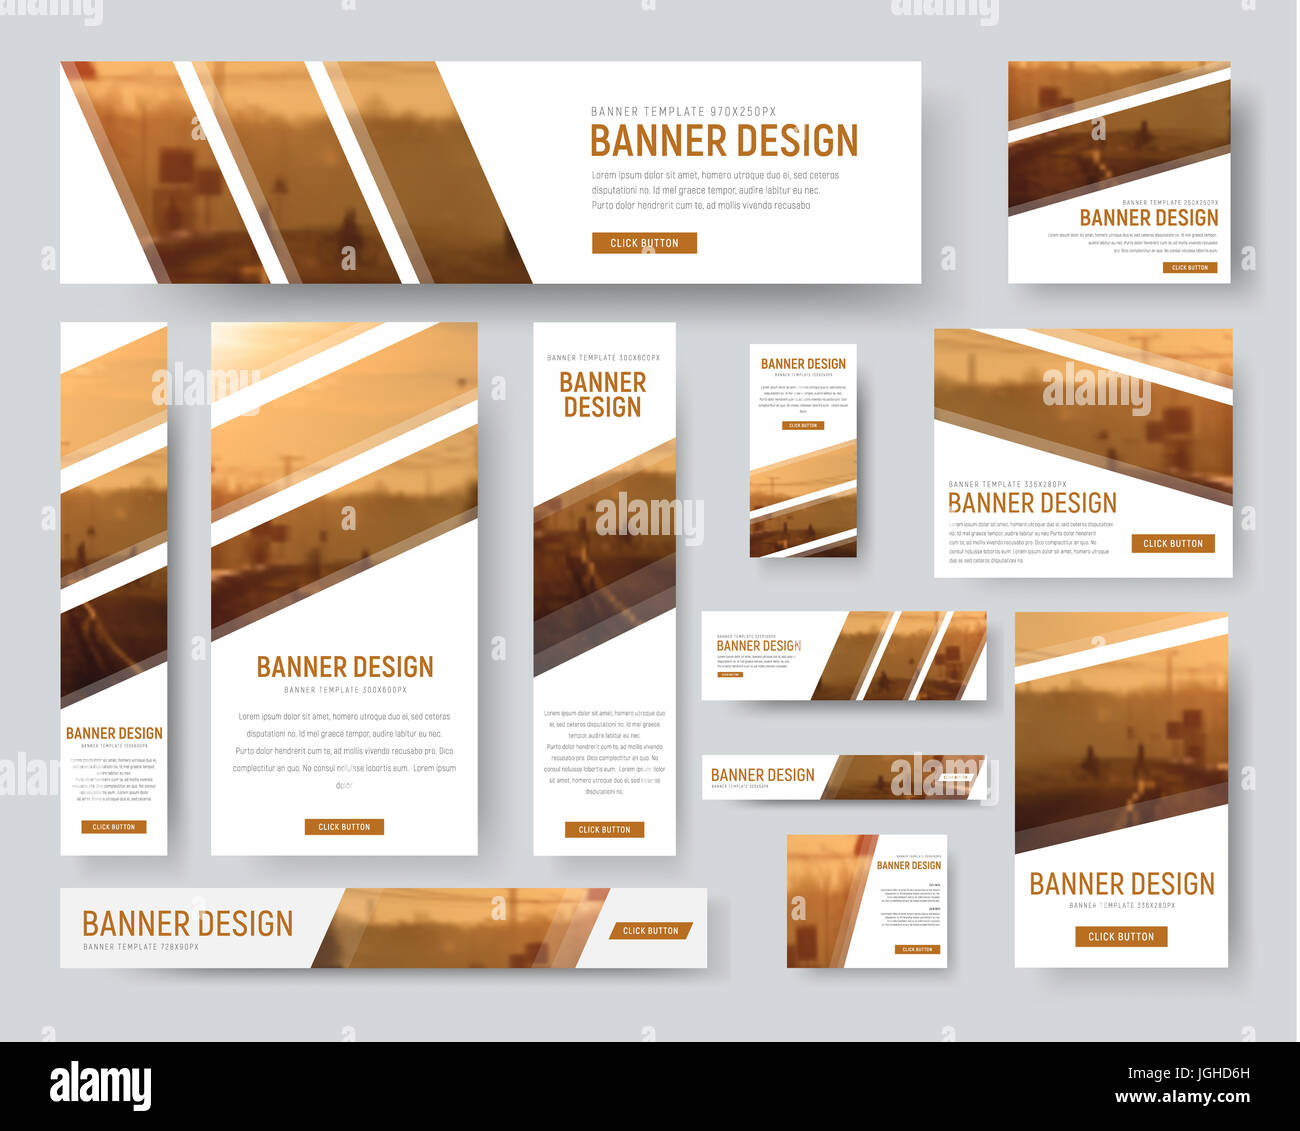 set of standard size banners. Web templates with diagonal stripes for photos. Blurred background for sample. Stock Photo